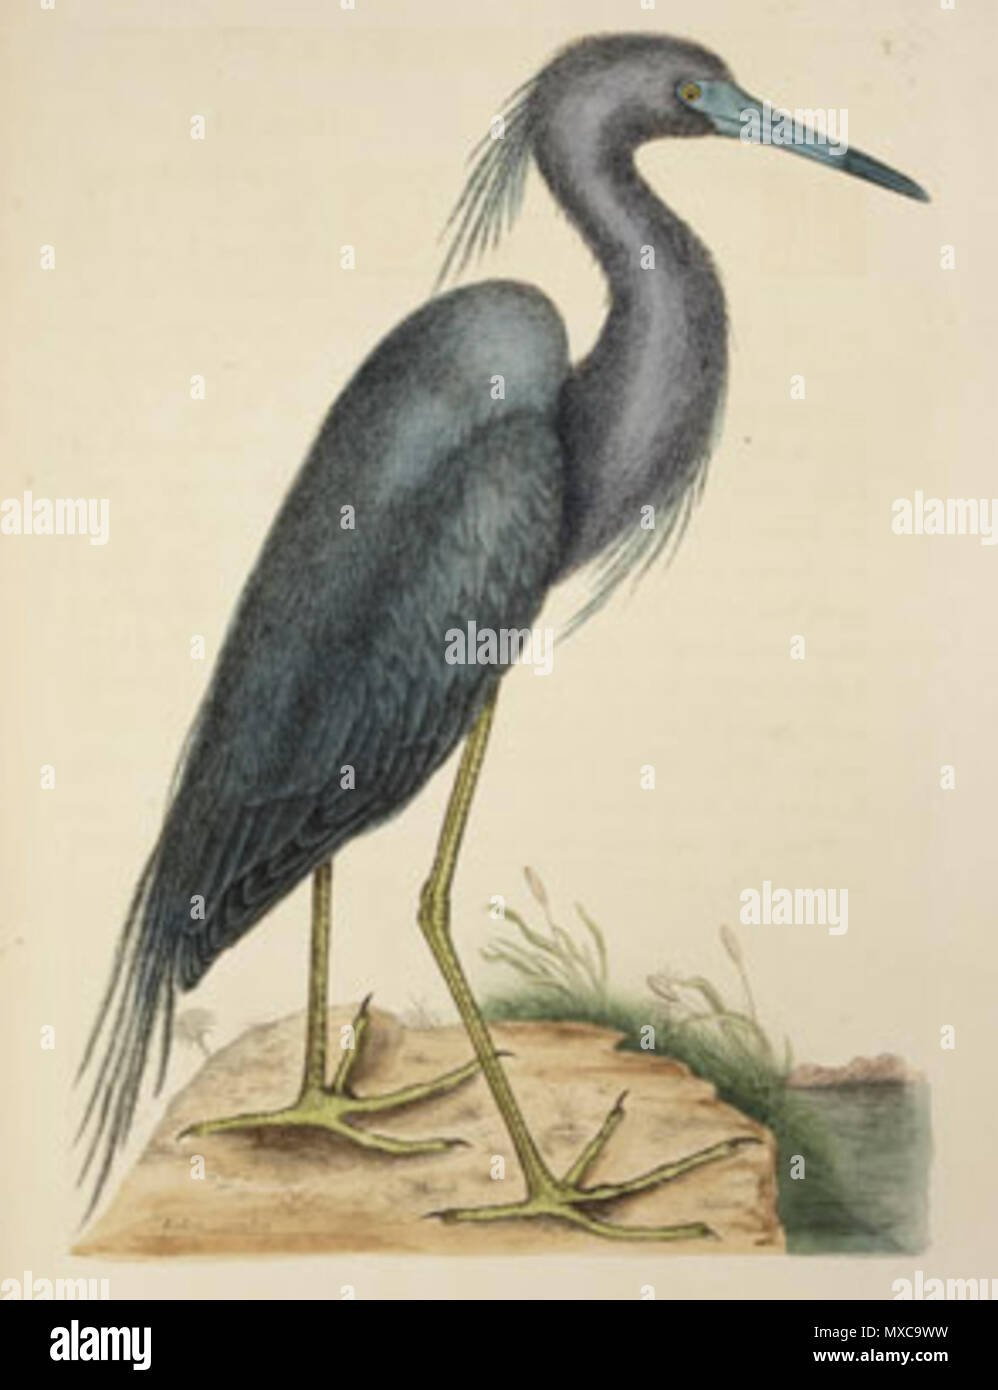 English: Mark Catesby - Heron from The Natural History of Carolina, Florida  and the Bahama Islands, 1731-1743, hand-colored engravings, William L.  Clements Library . between 1731 and 1743. Mark Catesby (1683-1749)